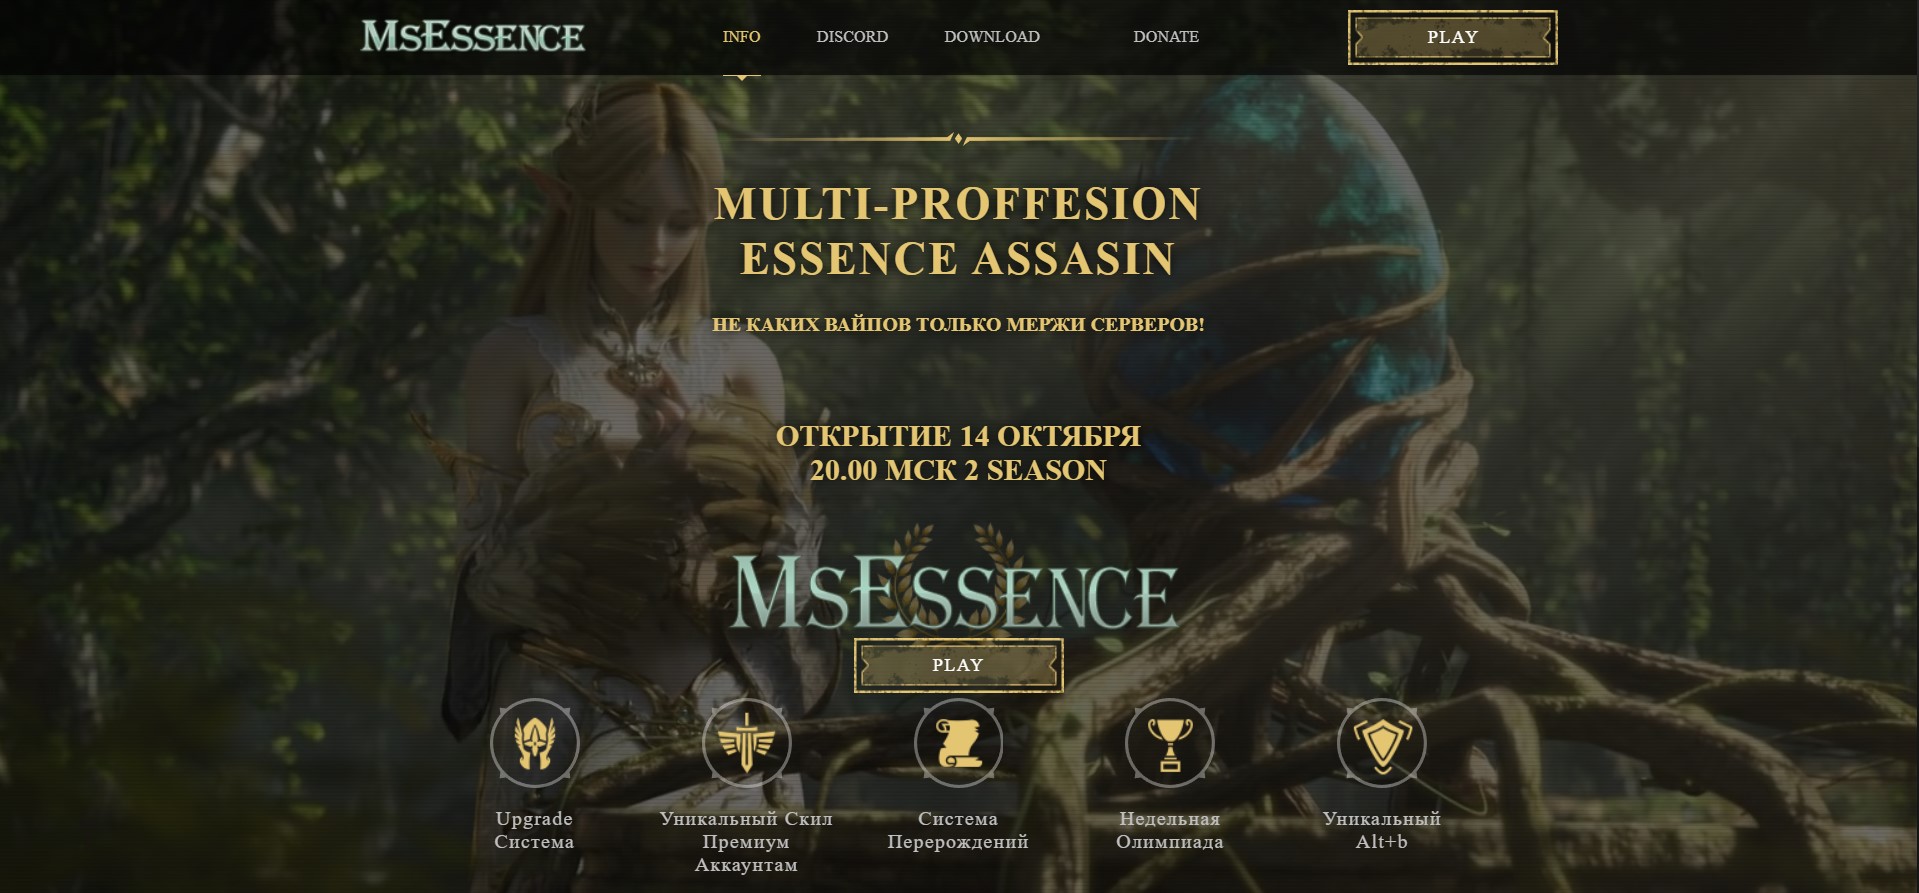 🌟 MSessence.fun: The Magnificent World of Lineage 2 Awaits You! ⚔️🌿